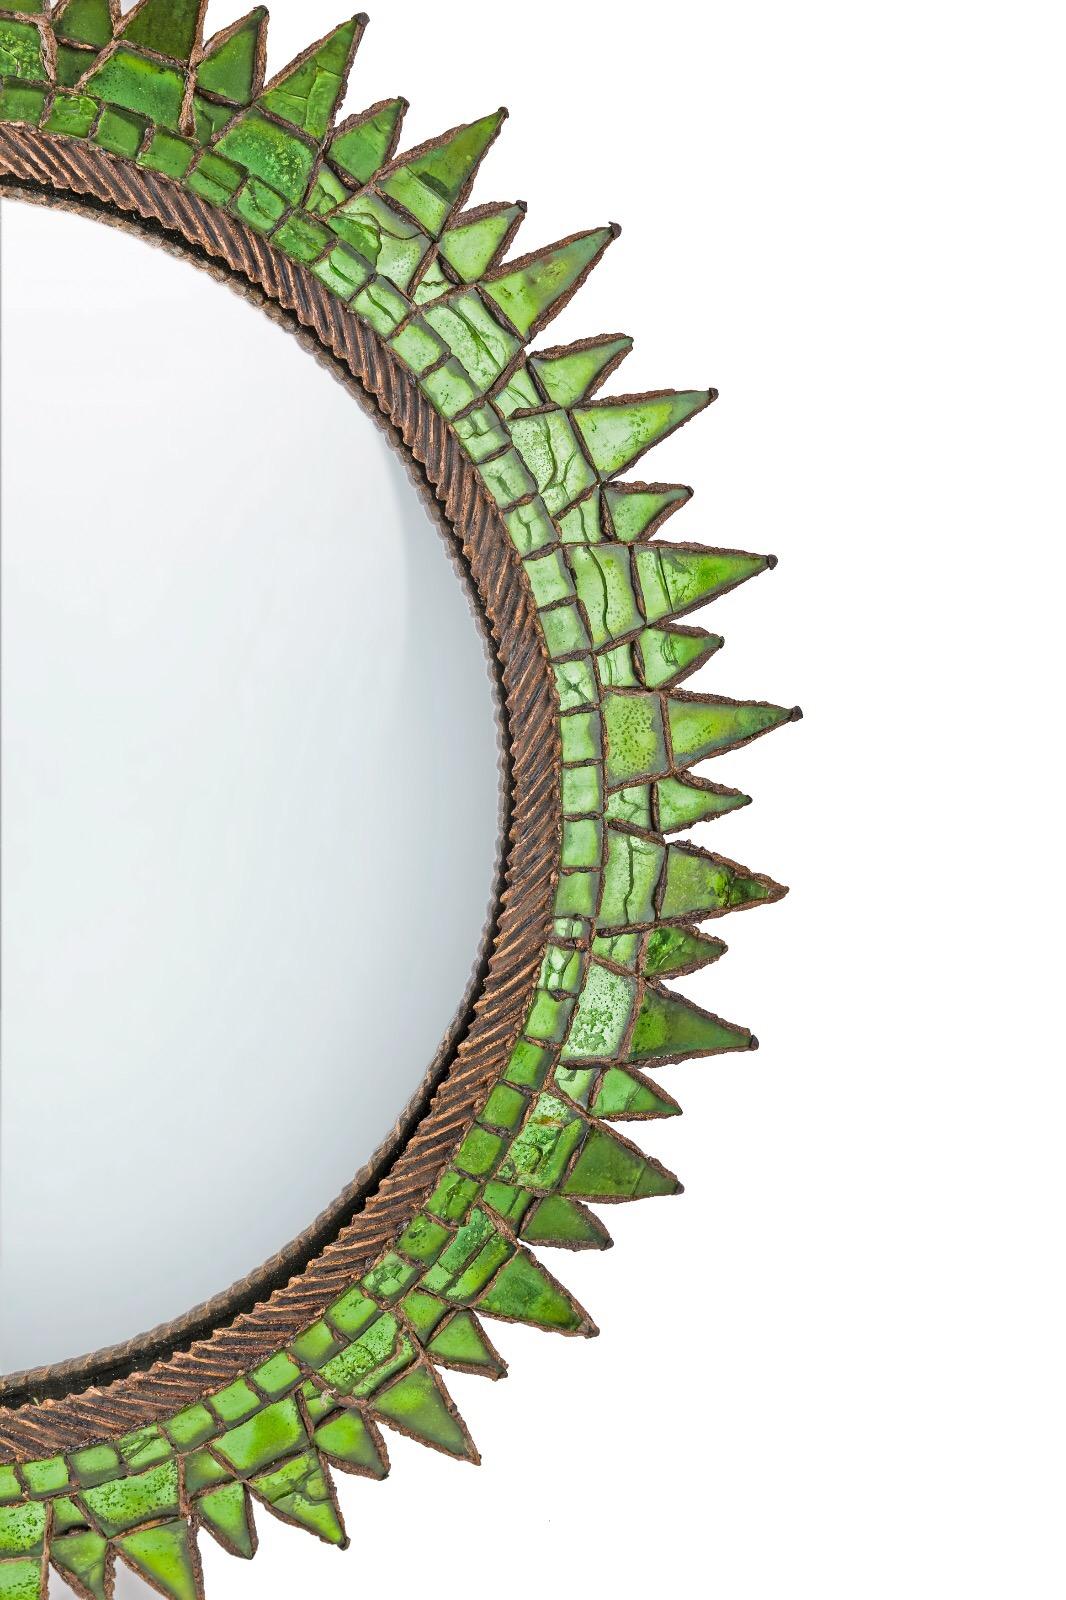 A Line Vautrin (France) soleil à pointes Numéro 4 Talosel structure with incrusted mirrors in one of the most desirable color: Emerald green!
Convex central mirror.
The largest sizes of Soleil à pointes mirror by Line Vautrin.

This mirror is